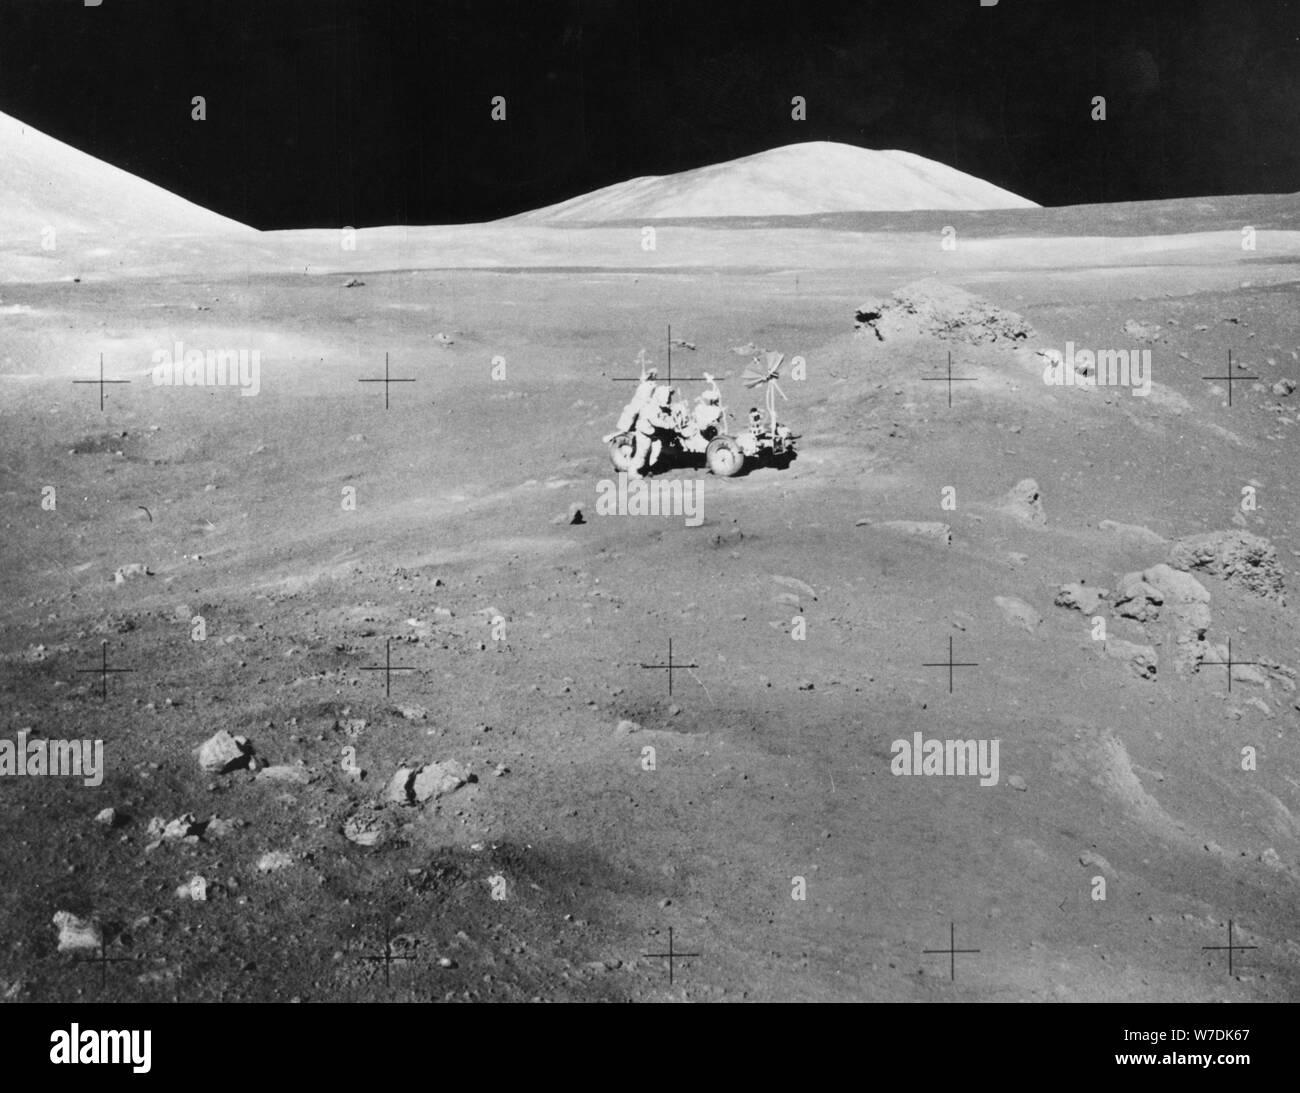 Lunarscape of Station 4, showing Harrison Schmitt at the lunar roving vehicle, 1972.  Creator: Unknown. Stock Photo